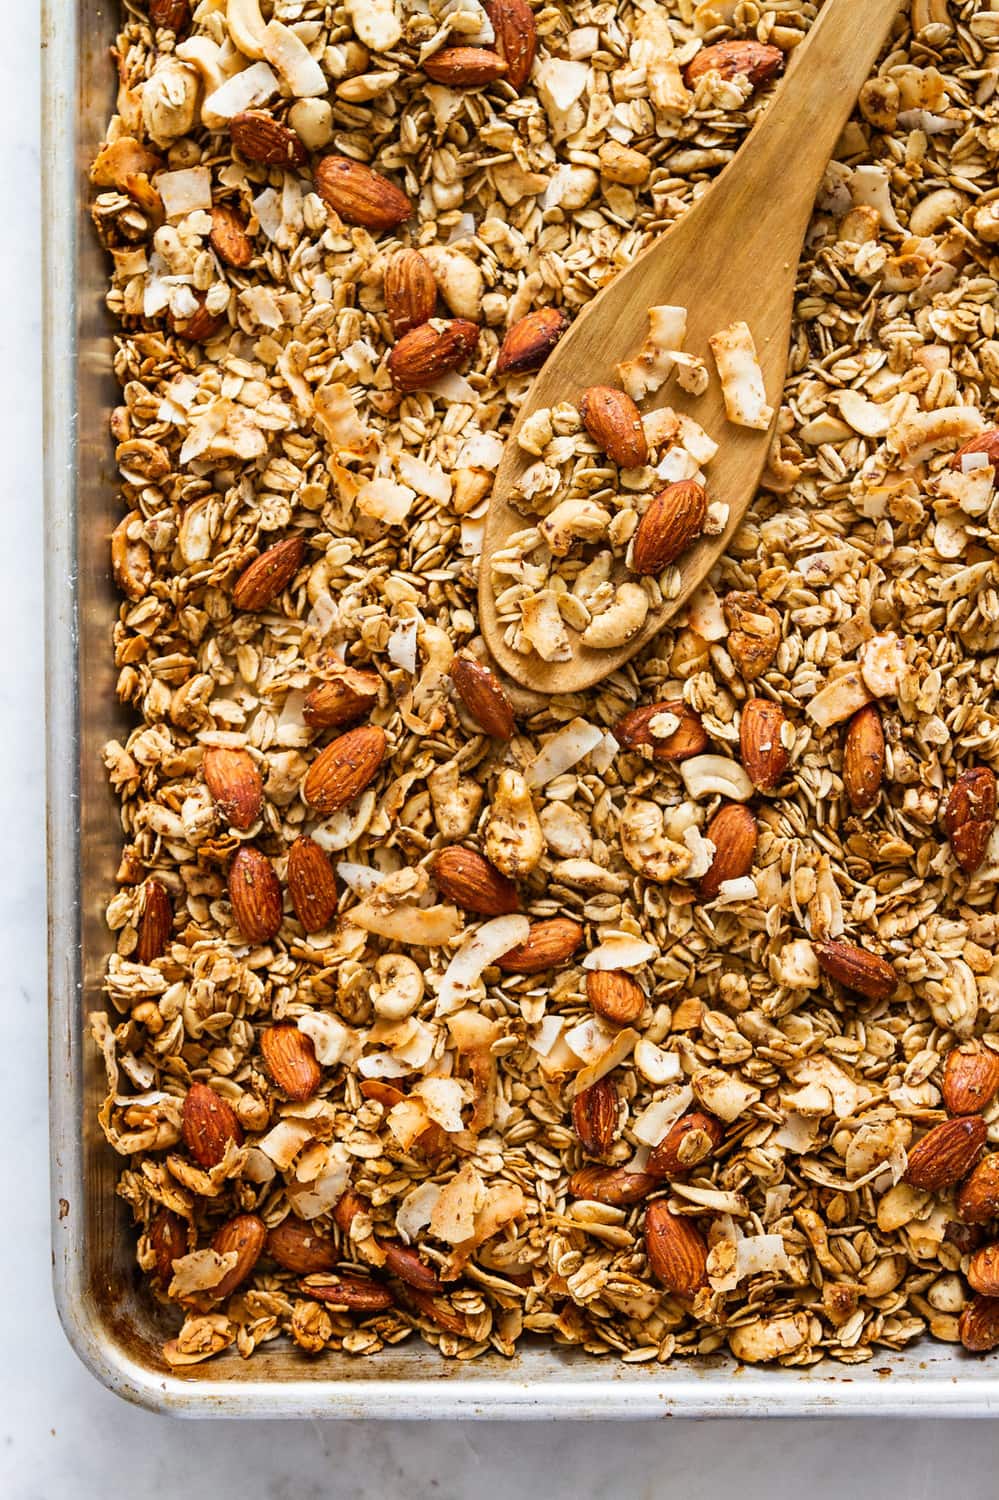 healthy granola just finished baking in the oven